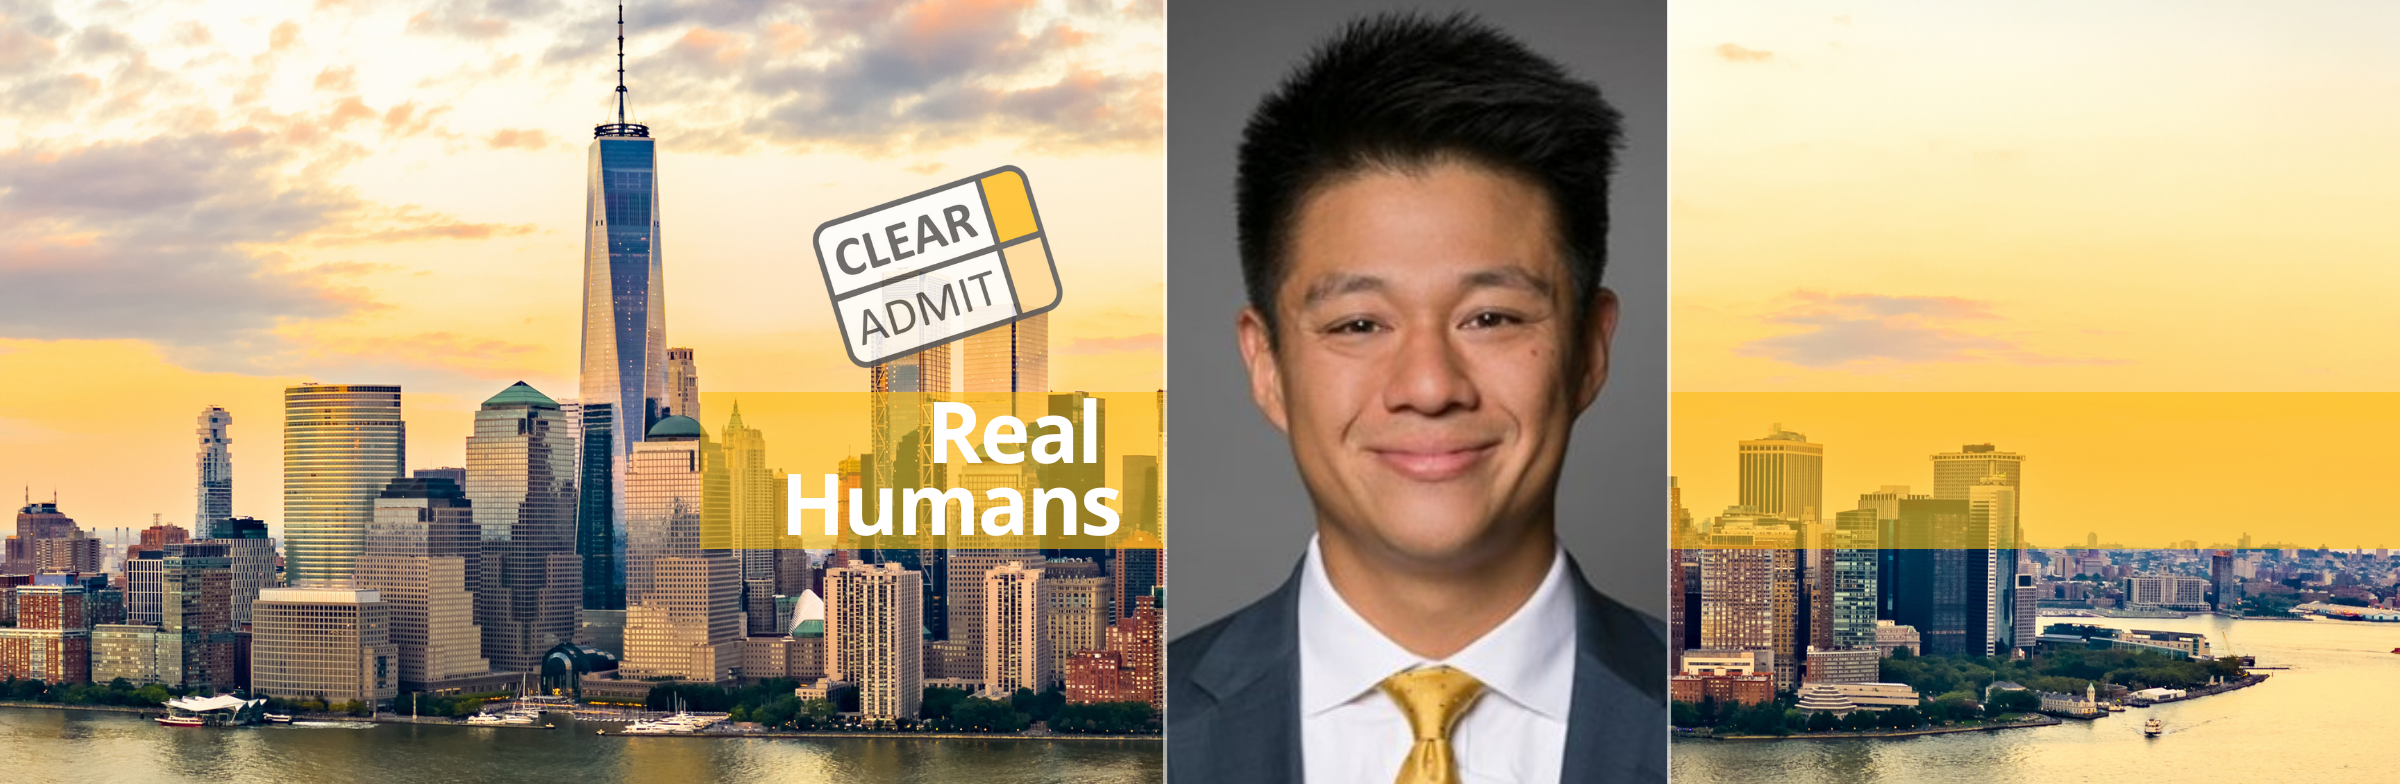 Image for Real Humans of J.P. Morgan: Brian Guo, Cornell Johnson MBA’ 19, Investment Banking